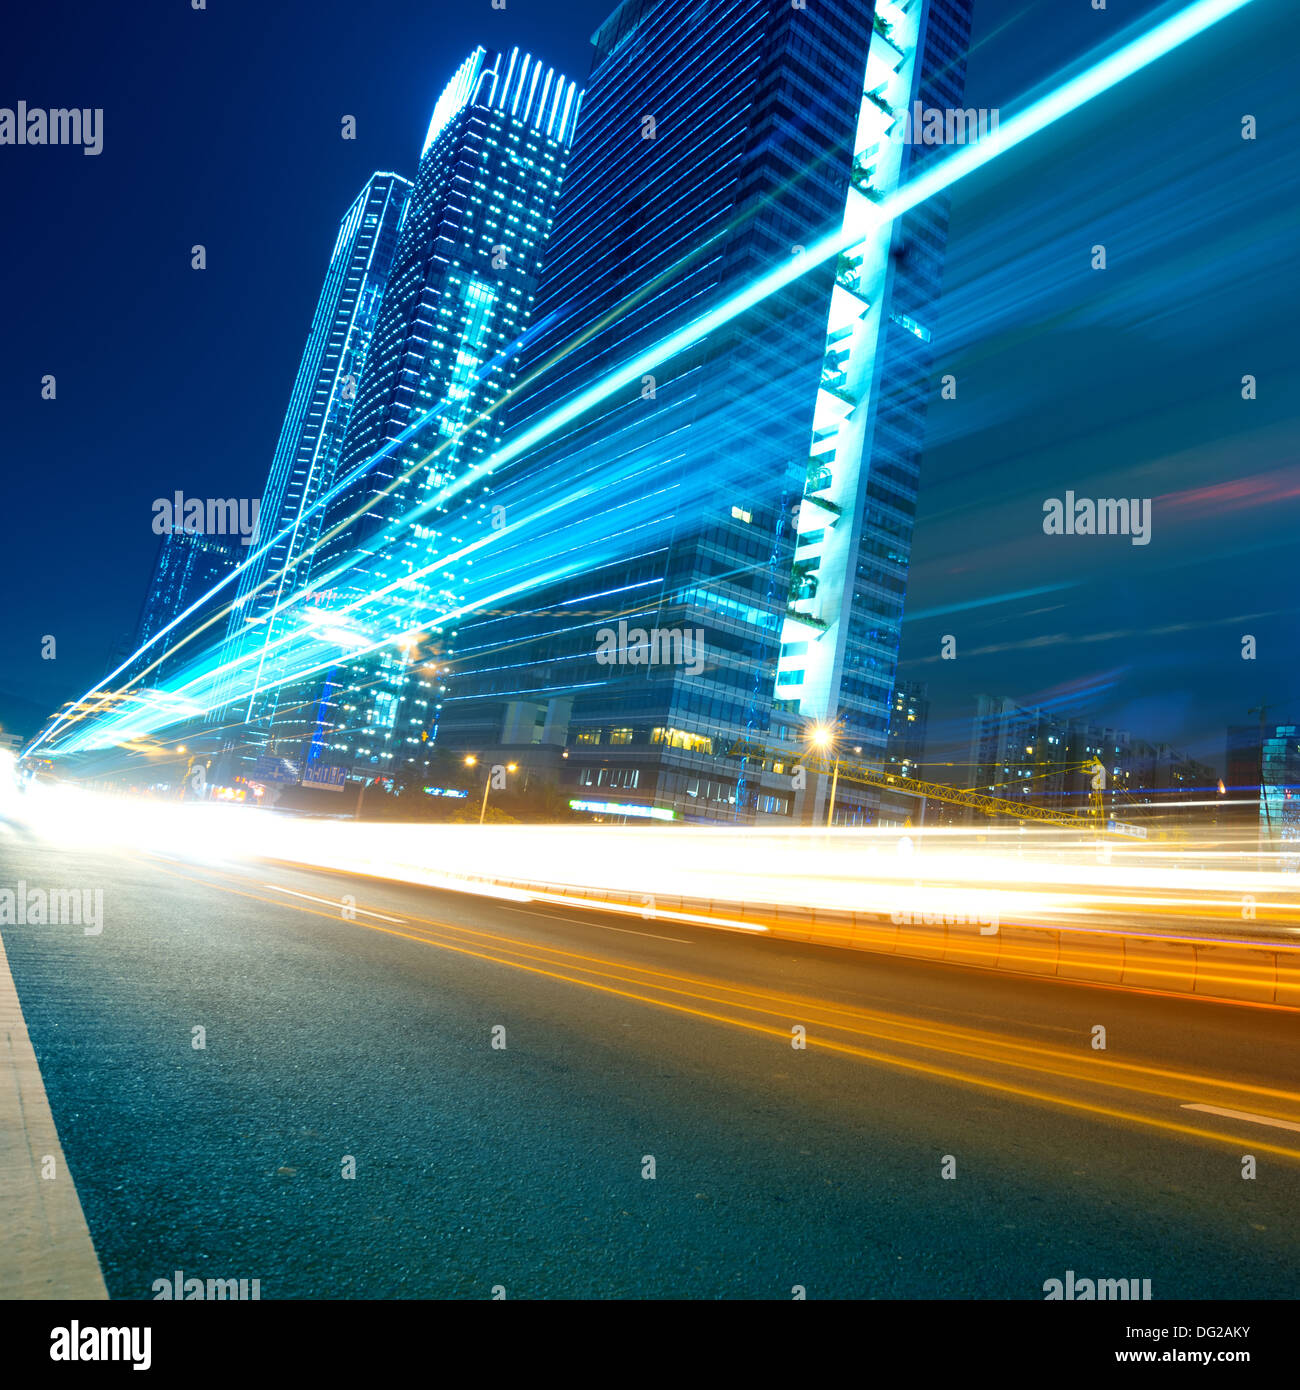 the light trails on the modern building Stock Photo